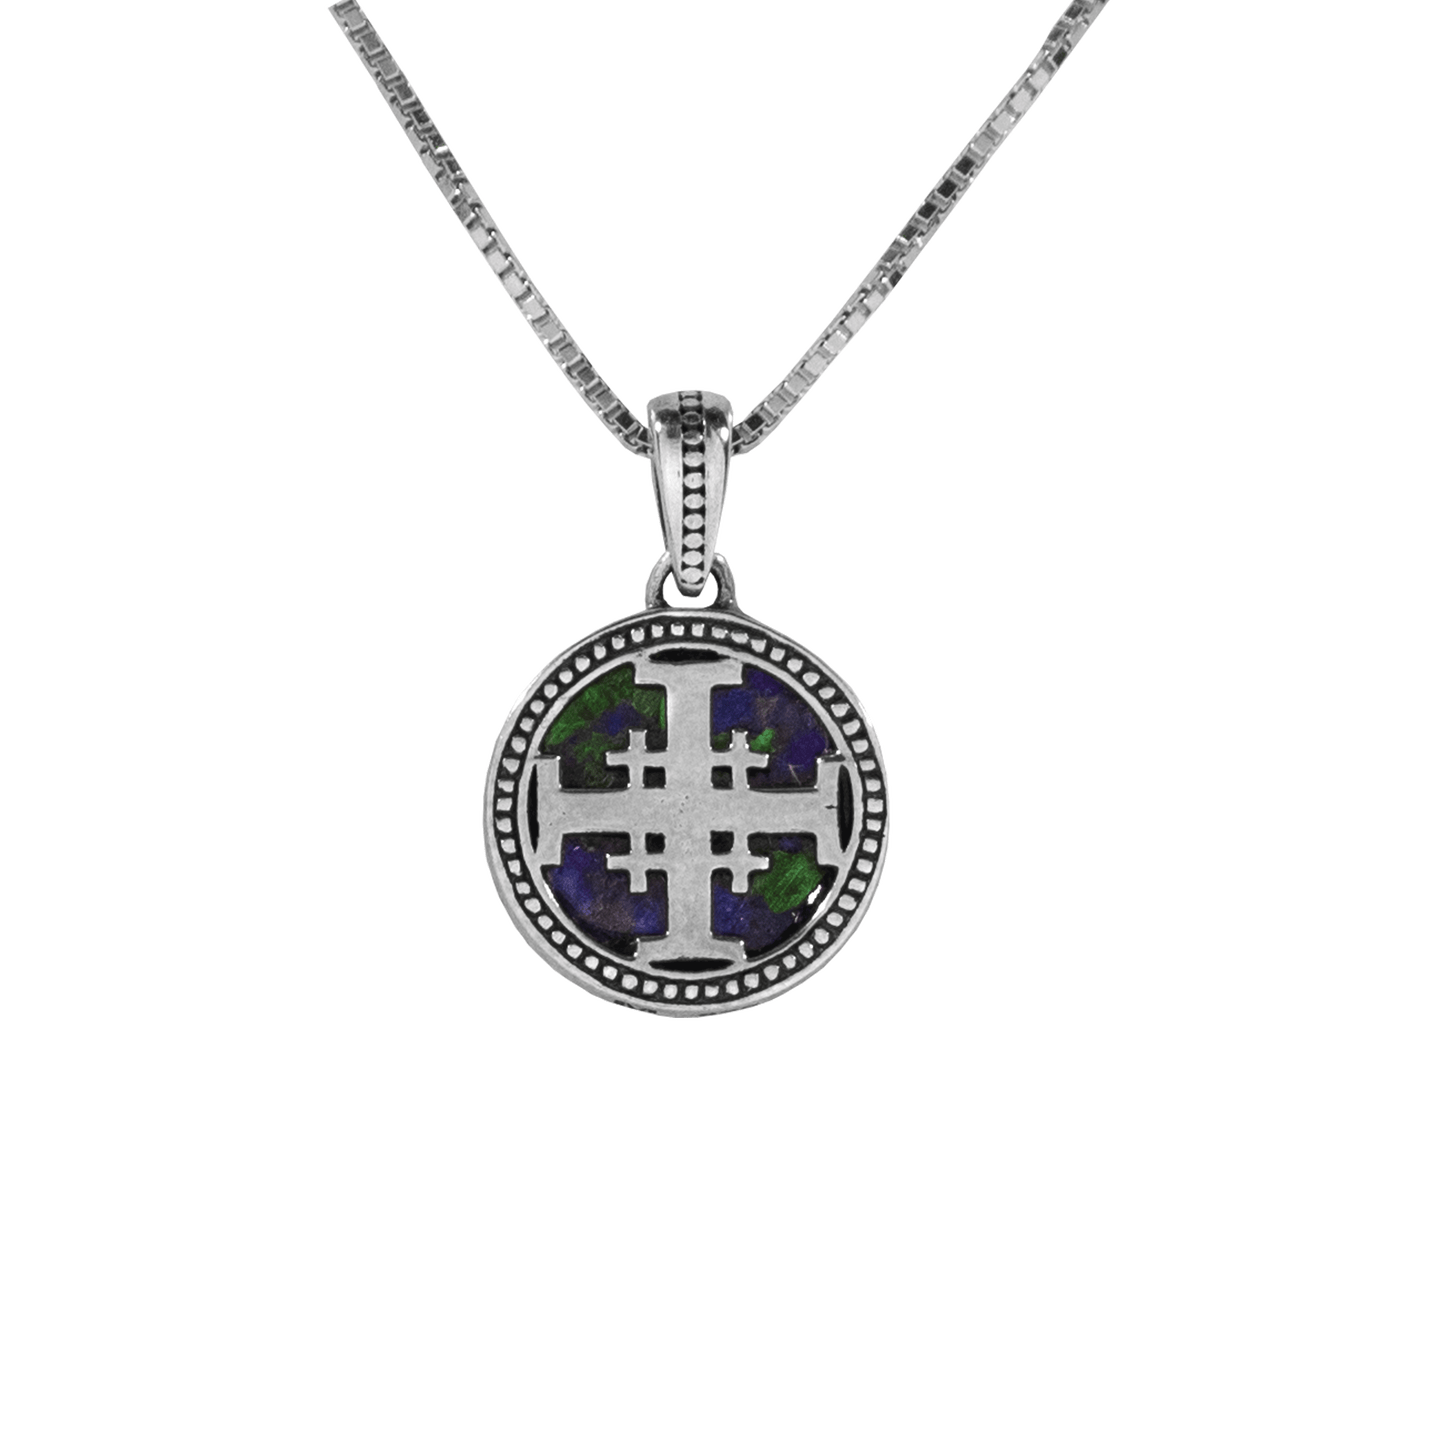 Eilat Stone with silver Jerusalem Cross overlaying it on a Sterling Silver Chain